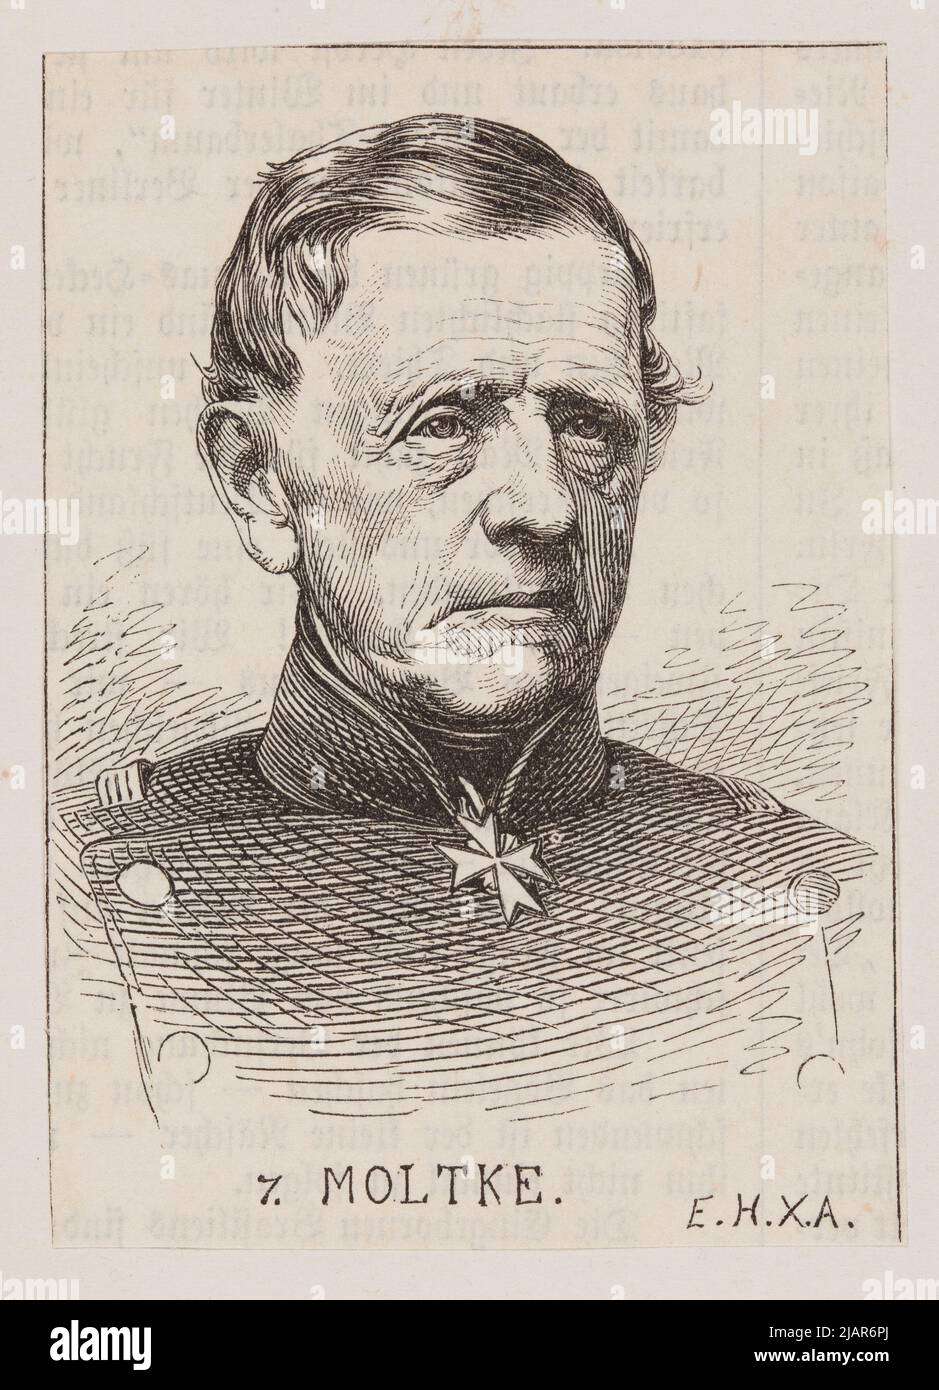 Moltke  a clip from the German press stuck to the album's card. Helmuth Karl Bernhard von Moltke (1800 1891)  Prussian general and Feld Marshal, reformer of the Prussian and then imperial army. He also showed artistic passions. Monogramista E.H.X.A. Stock Photo